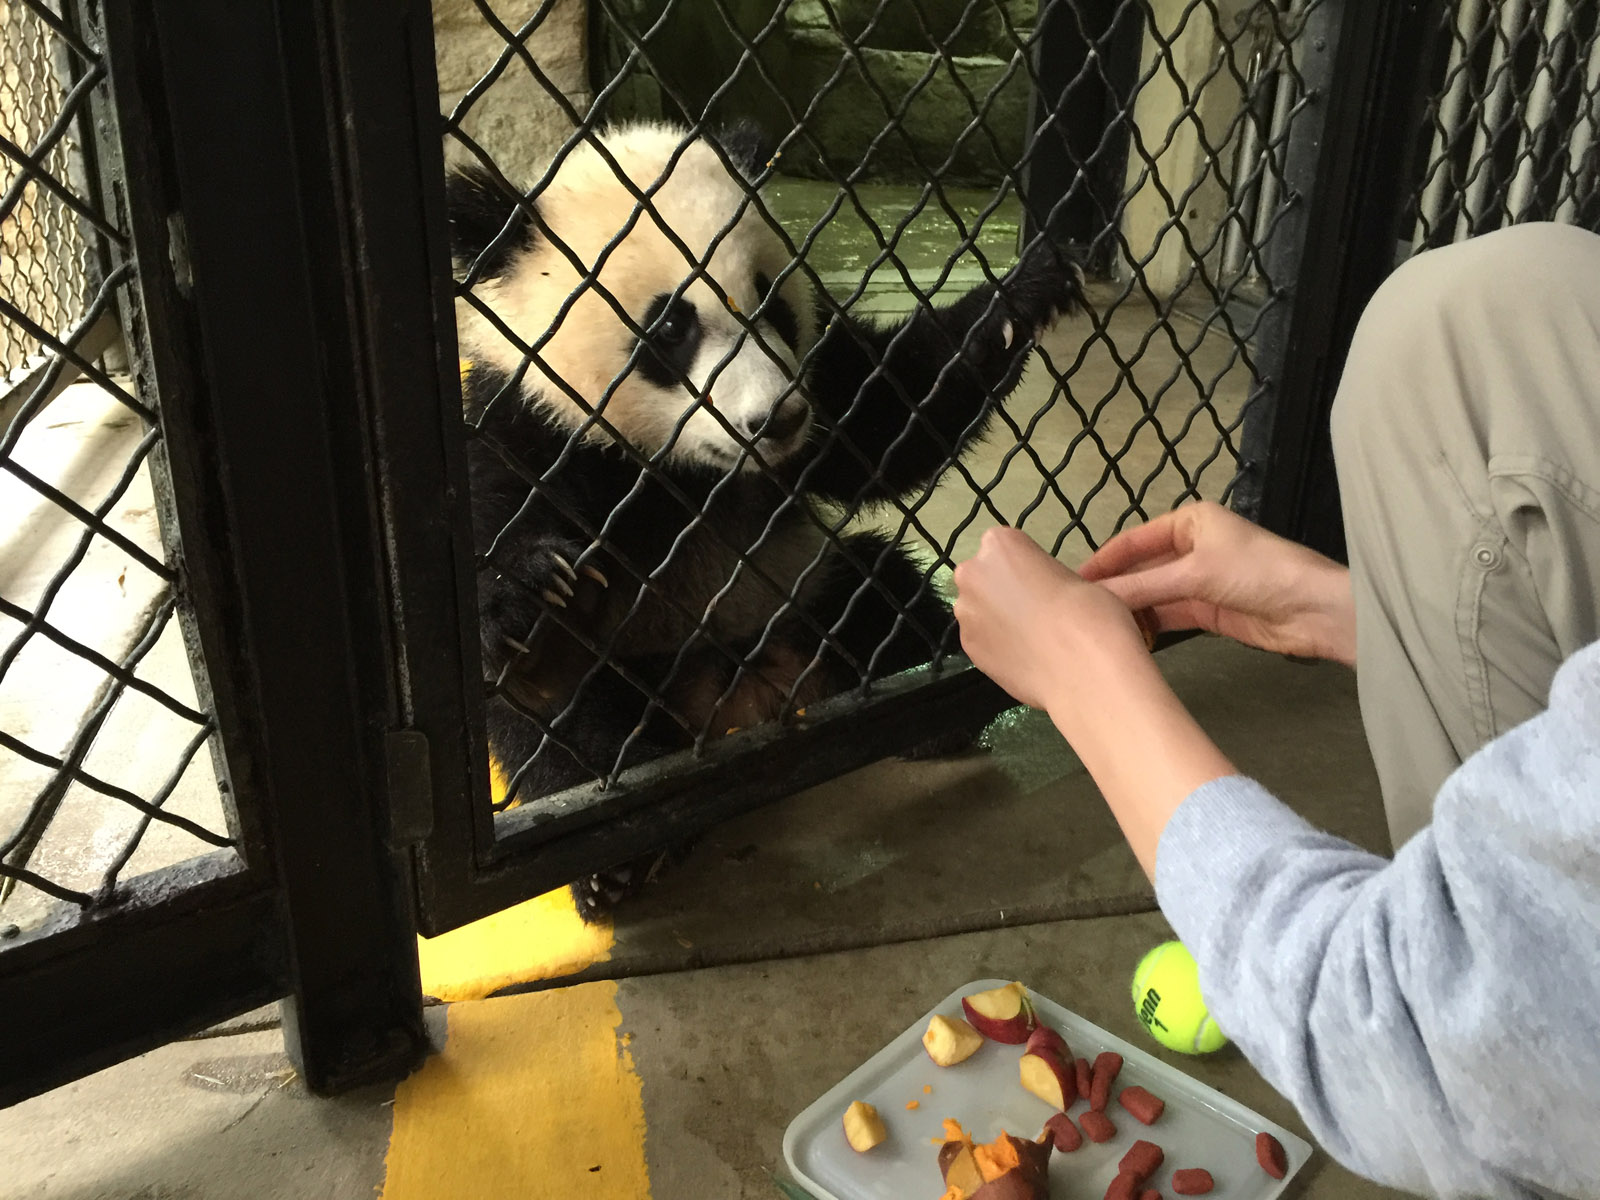 Bei Bei is very food motivated and responsive to being offered treats of apples, sweet potato and a leaf-eater biscuit which is made of soy protein. (WTOP/Kristi King)